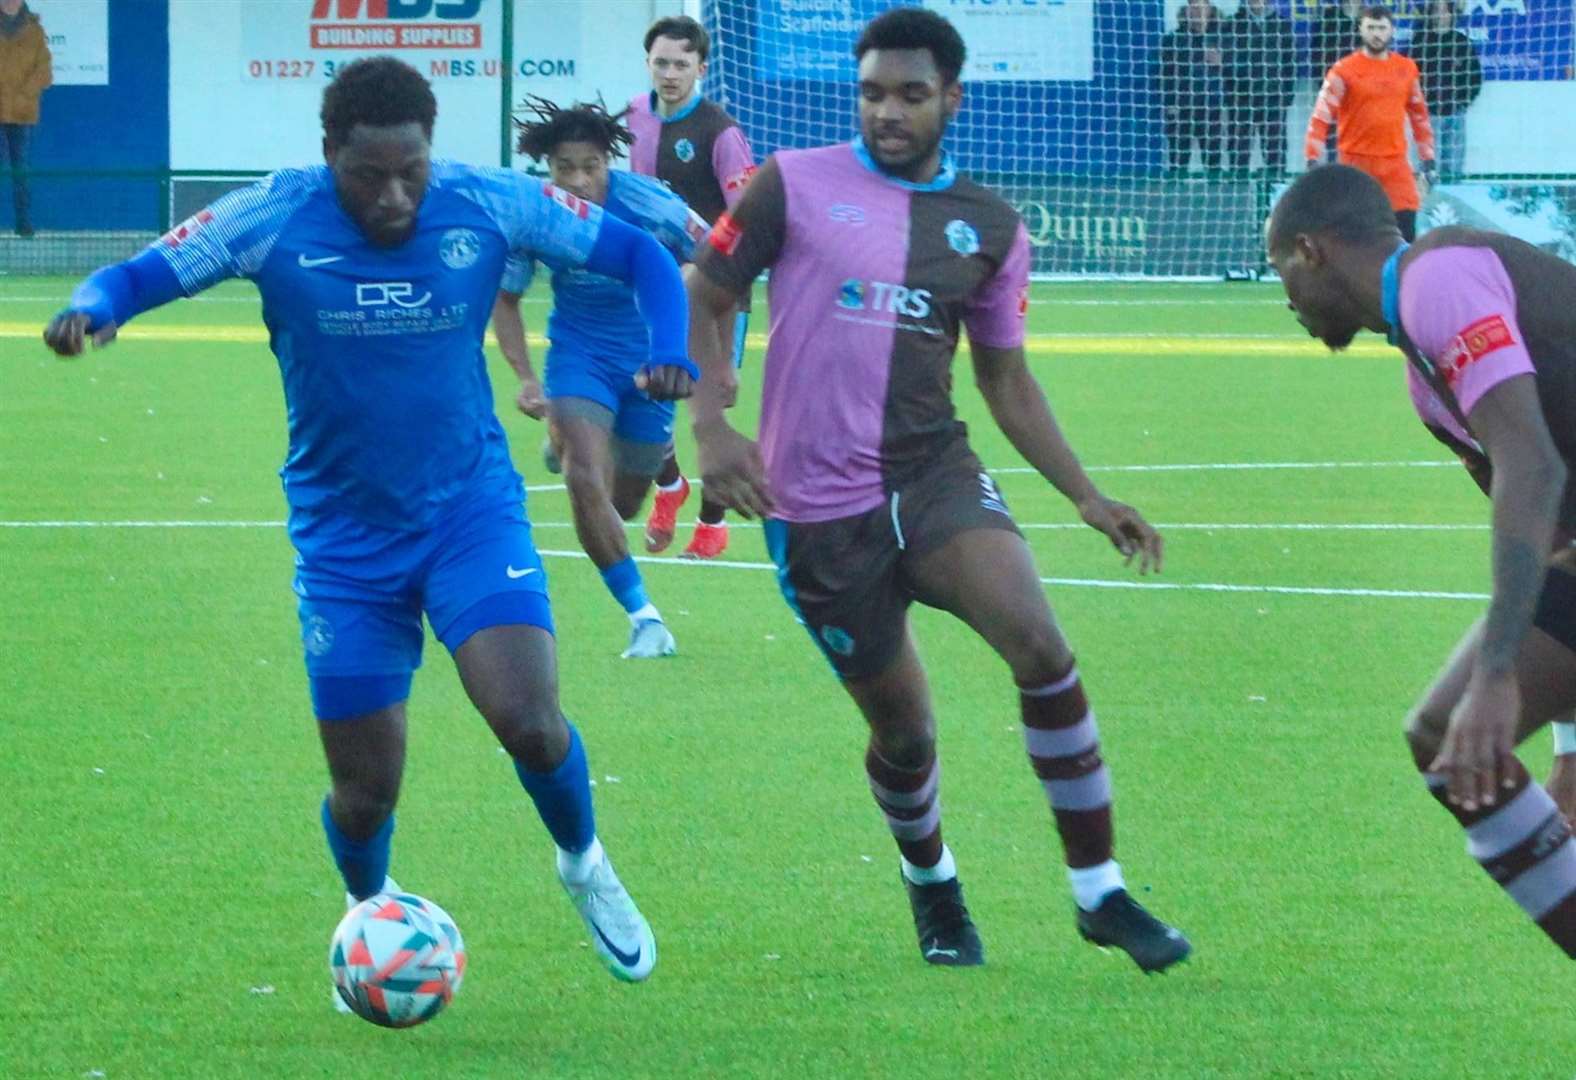 Striker Marcel Barrington - got on the scoresheet in Herne Bay's 3-1 weekend win at Carshalton. Picture: Keith Davy